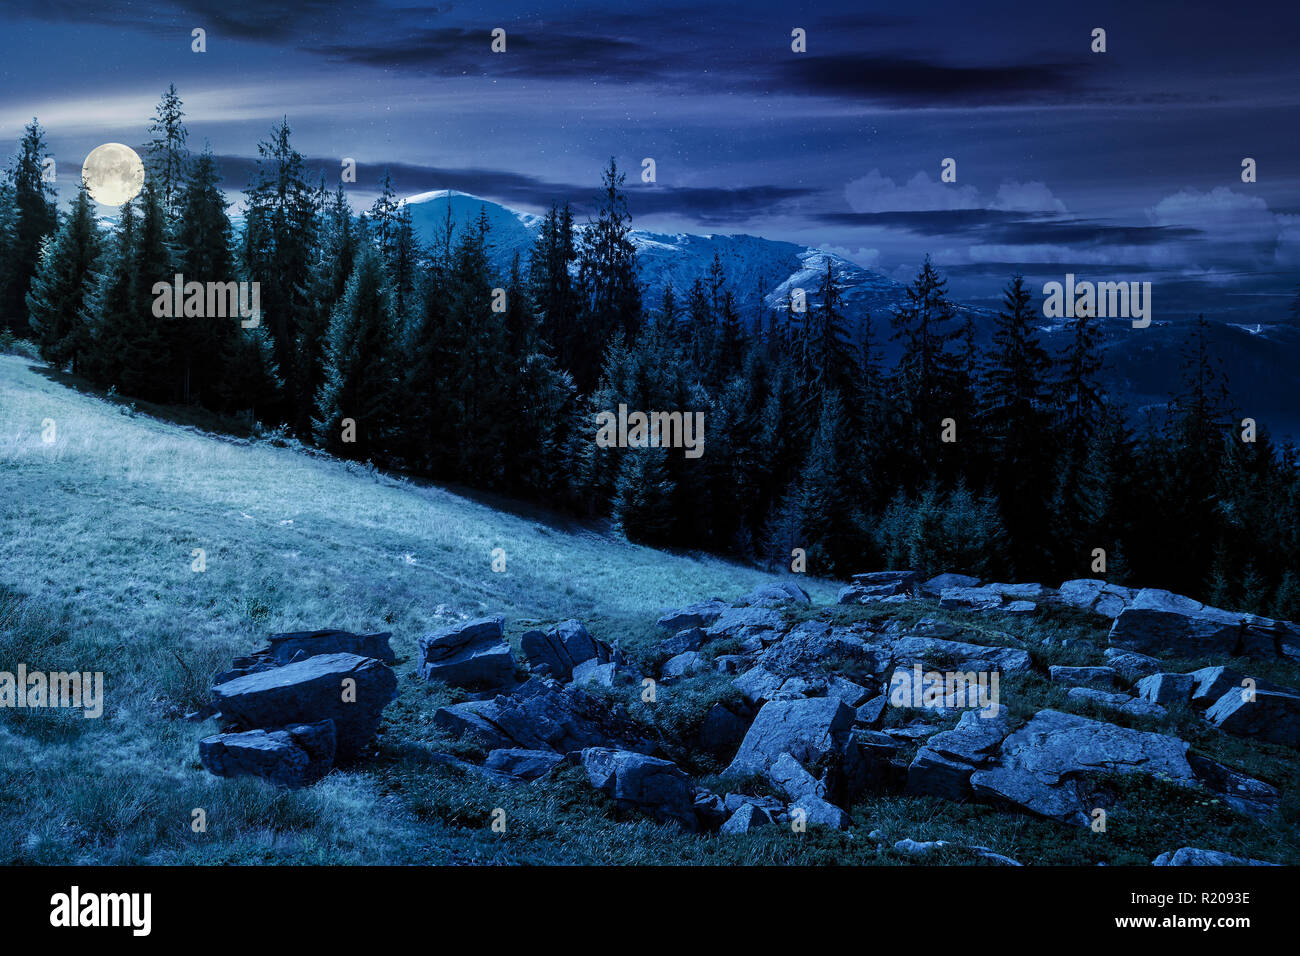 alpine summer landscape composite at night in full moon light. rock formation near the spruce forest on a grassy hill.  mountain with snowy top in the Stock Photo